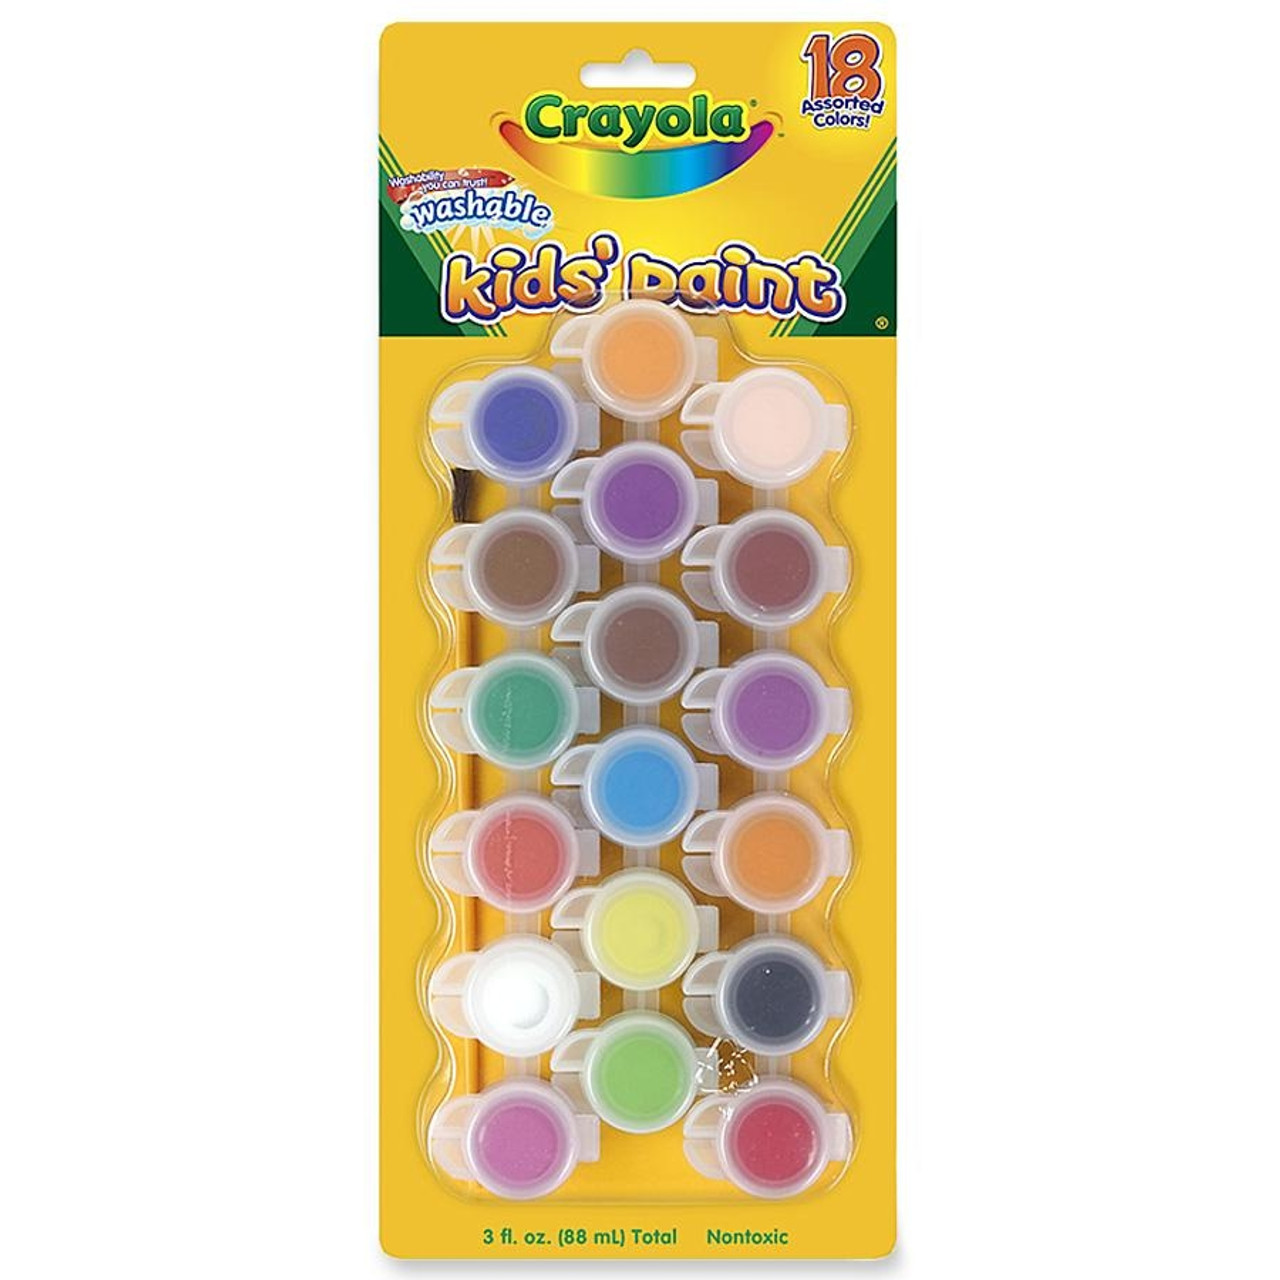 Crayola Washable Paint, 18 Assorted Colors, Interconnected 3 oz Cups  (540125)